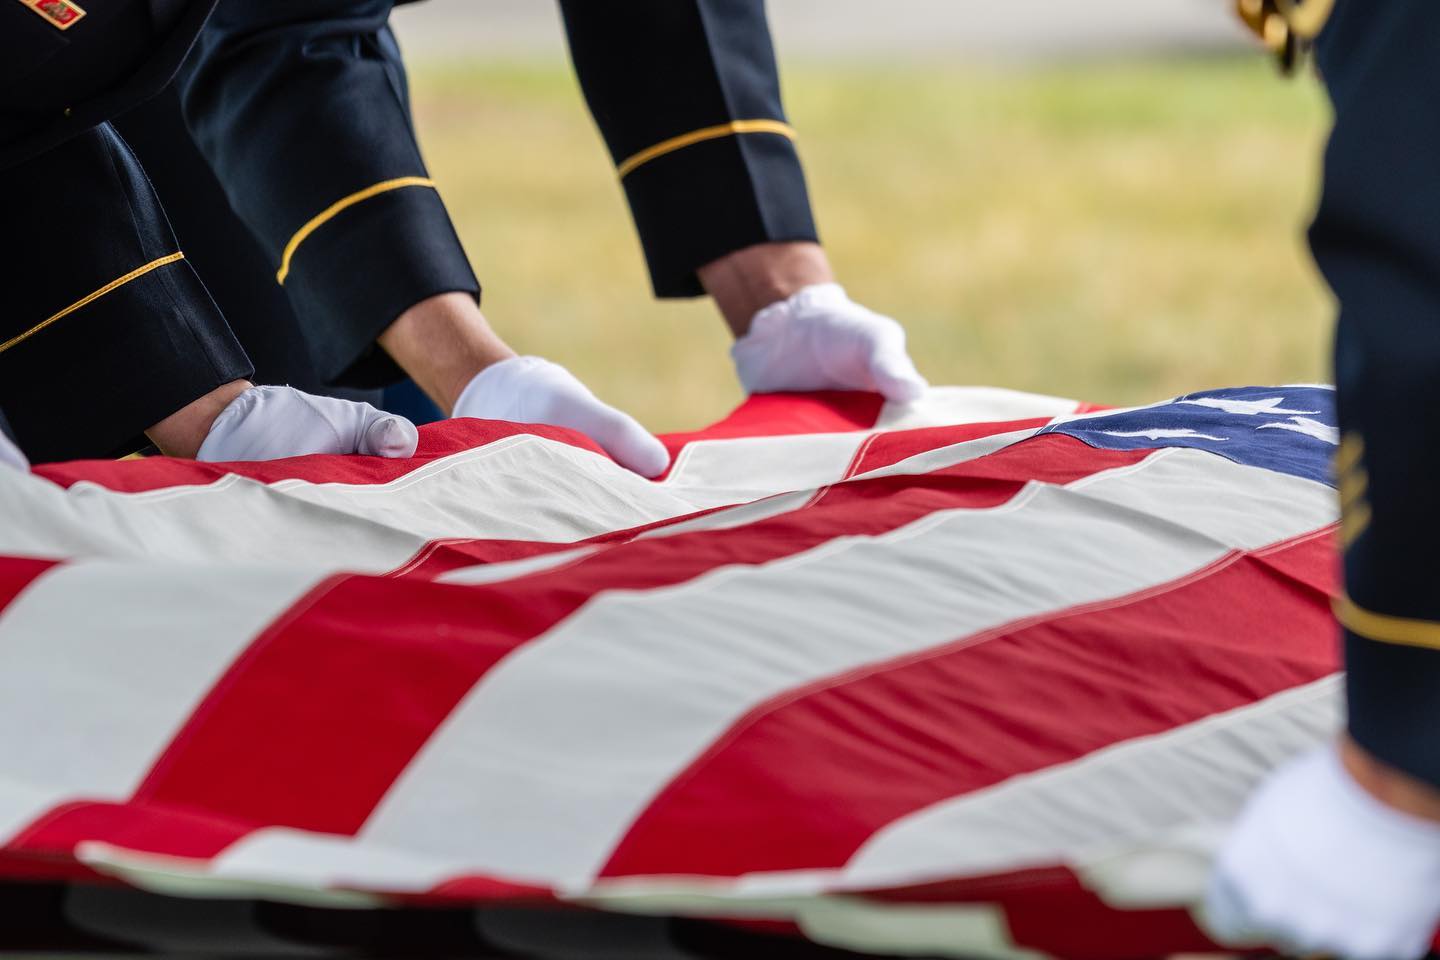 The crisp white gloves of a US Army soldier fold an American flag overtop the remains of an honored veteran in Arlington National Cemetery. 

Captured by the @arlingtonmedia team.